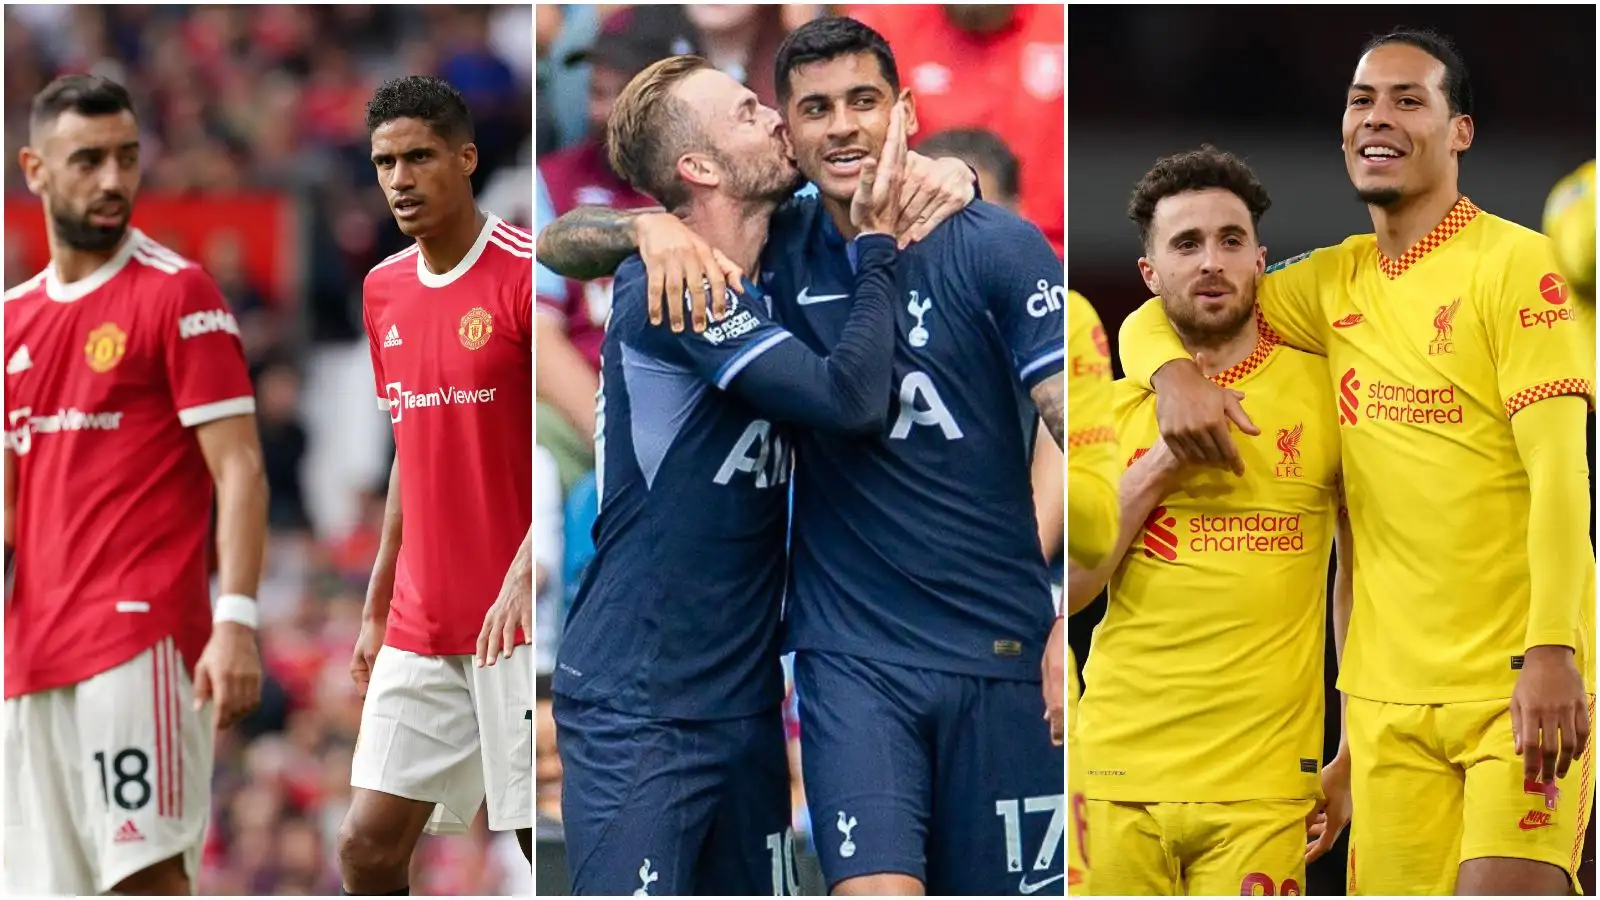 Arsenal lose, Spurs win big as United stay in 7th: updated Premier League  table after latest results - Football